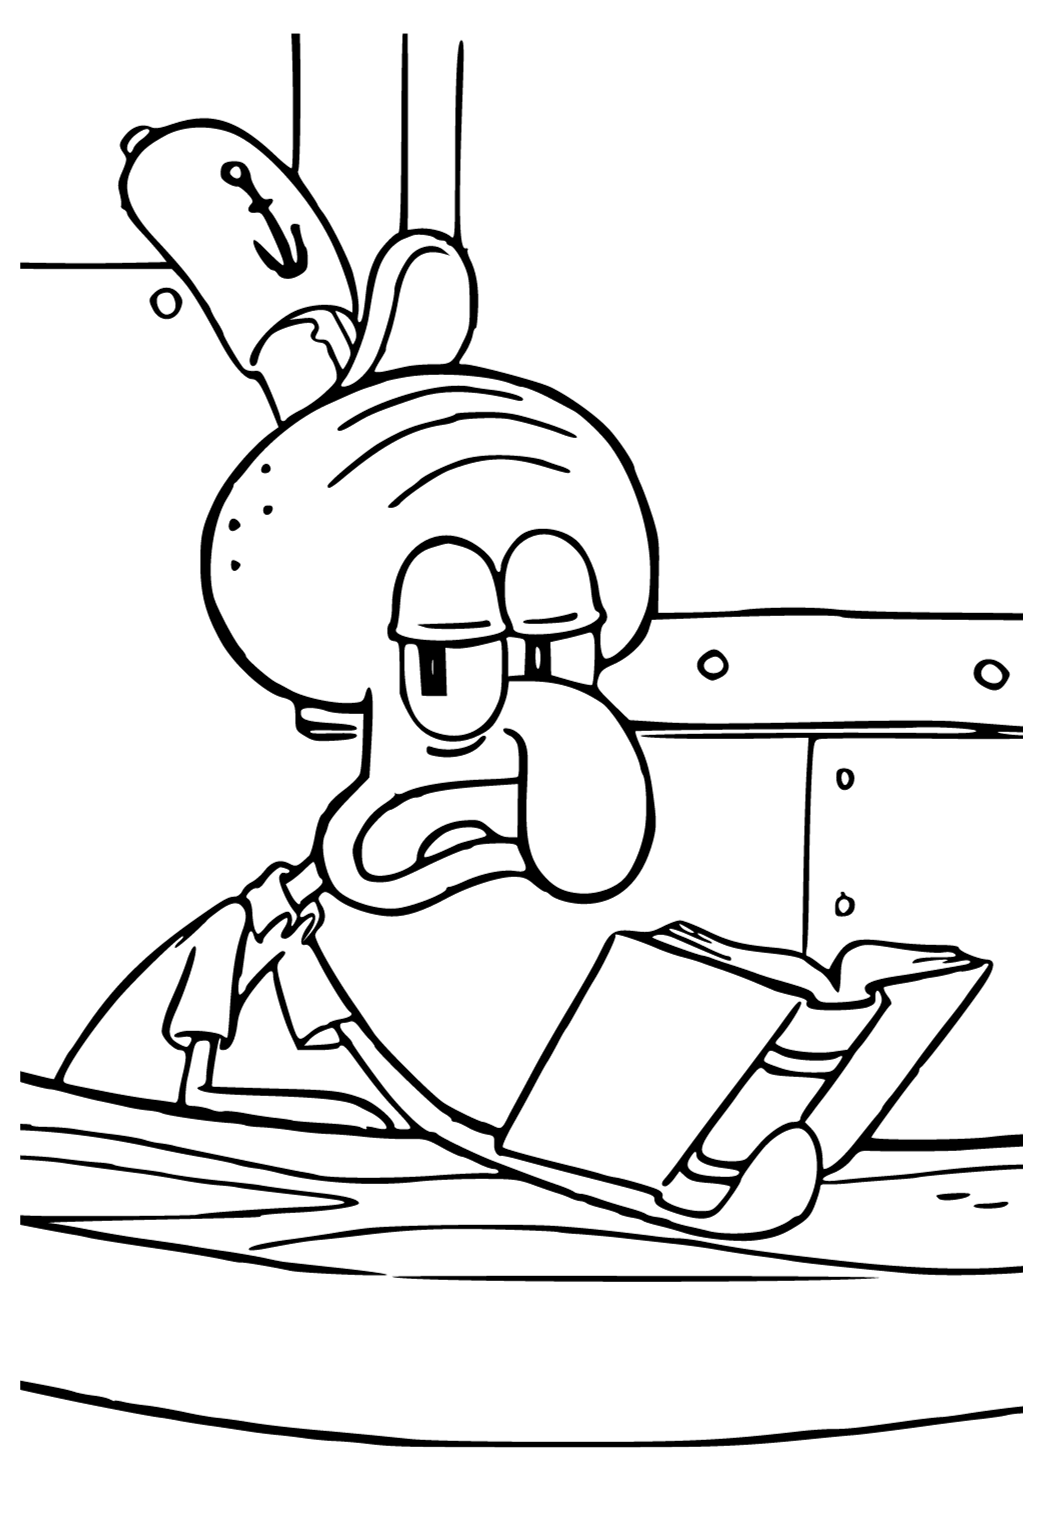 Free Printable Squidward Cashier Coloring Page for Adults and Kids 